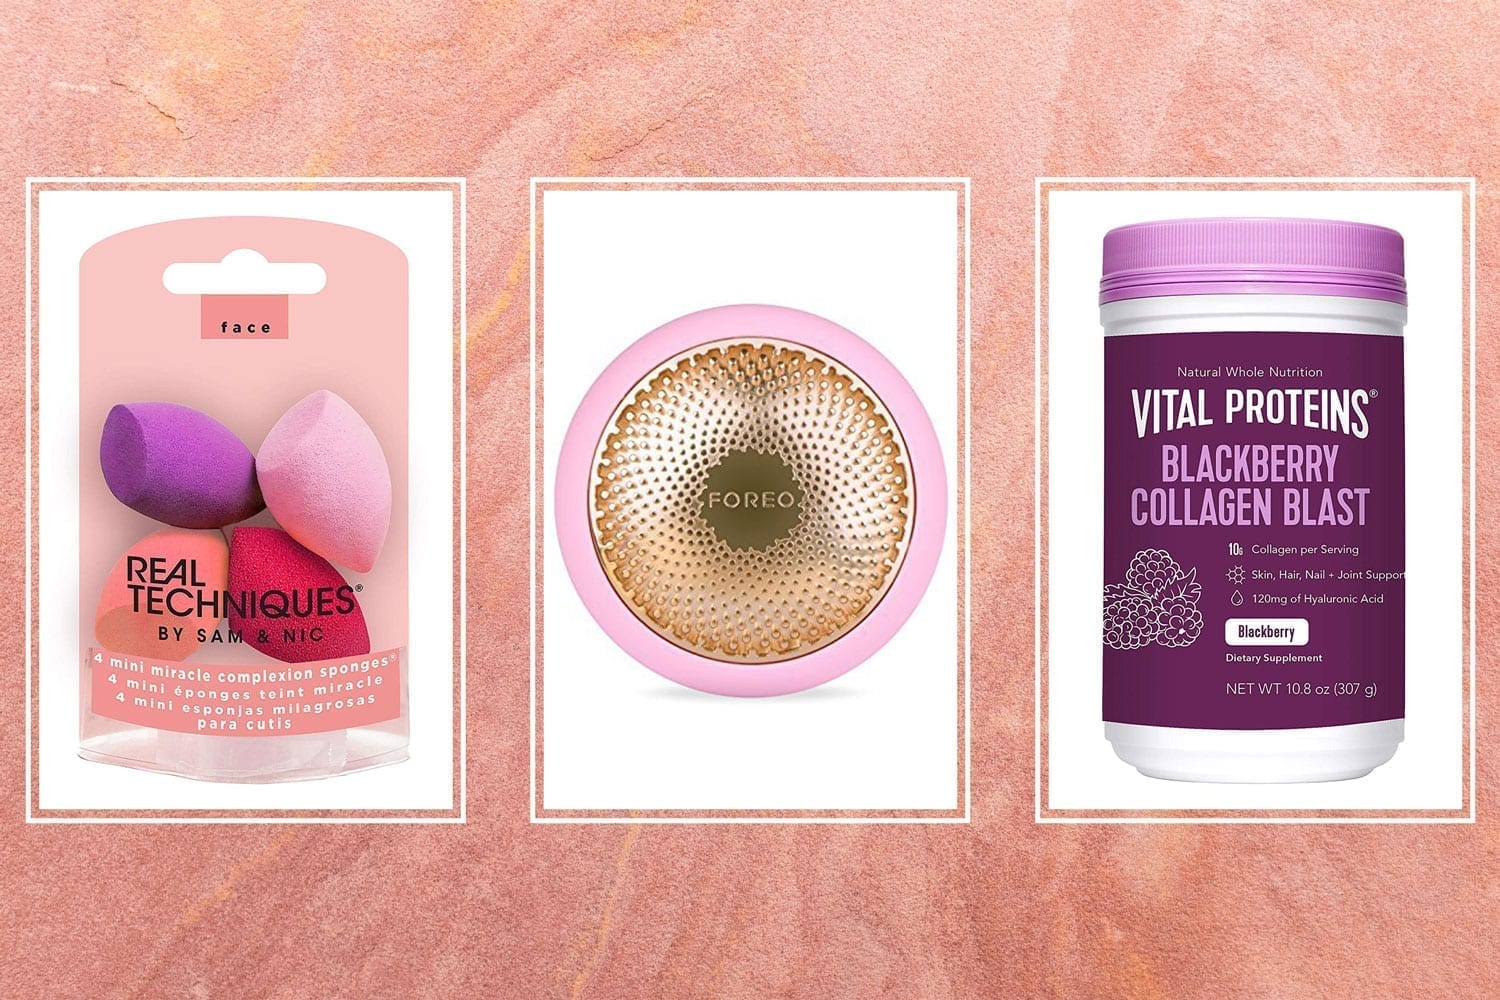 A triptych of of beauty sponges, a pink circular device with a gold center, and a white container with a purple lid and label.